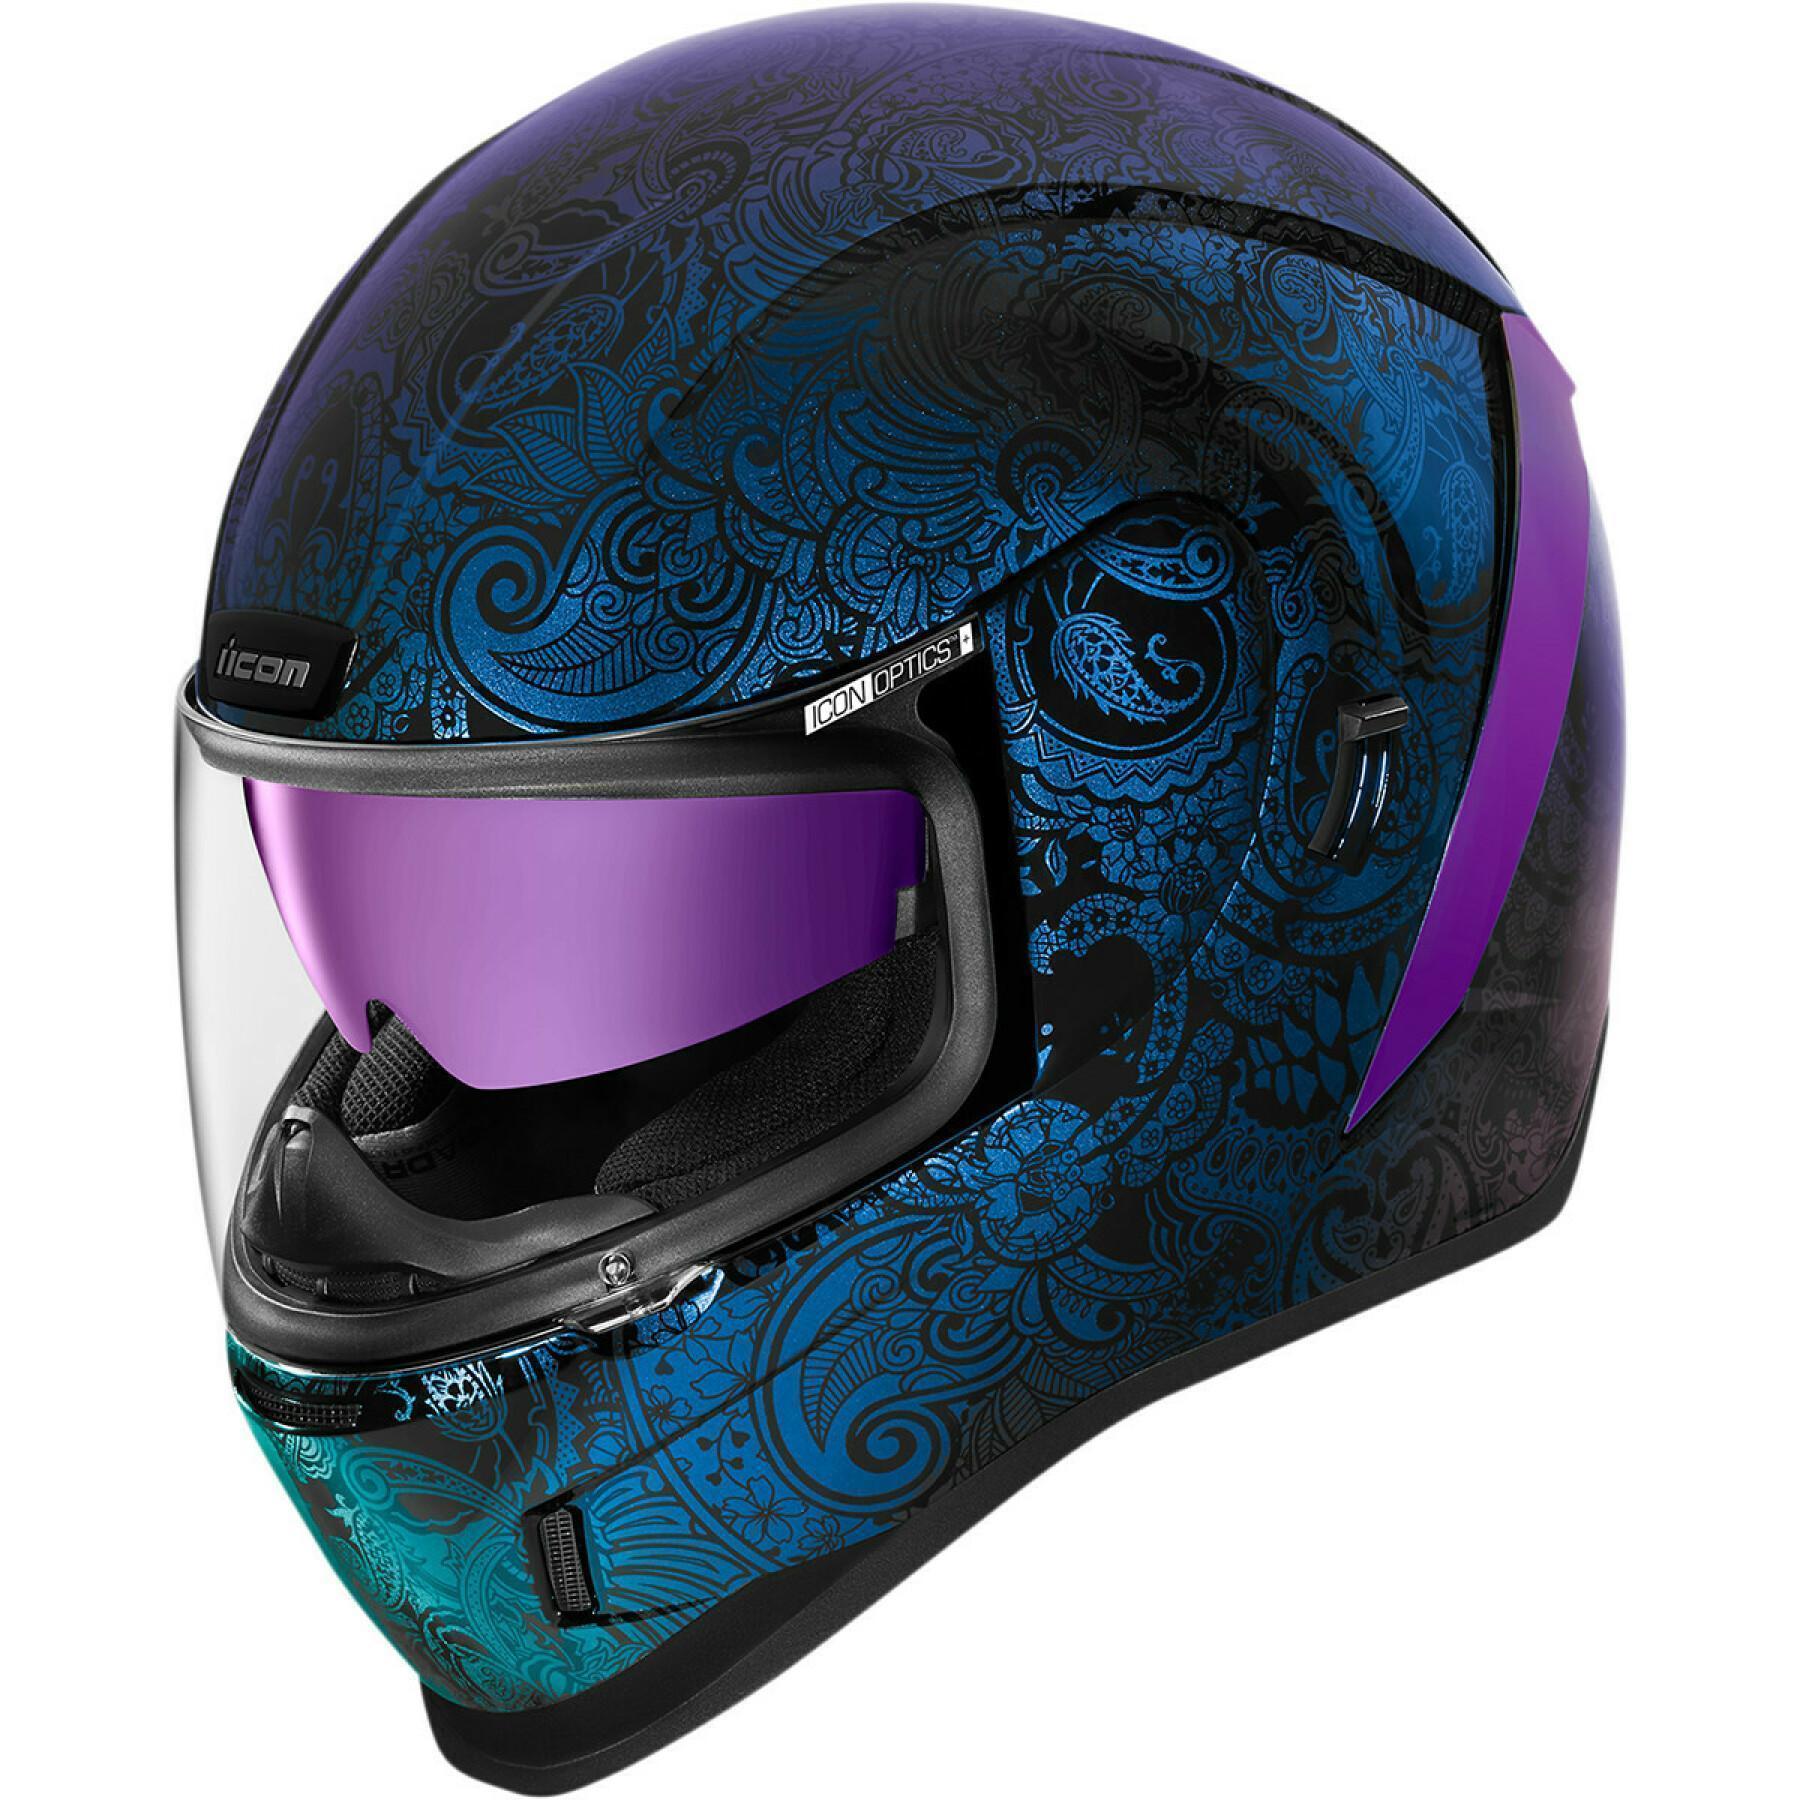 Full face motorcycle helmet Icon afrm chnt-opal